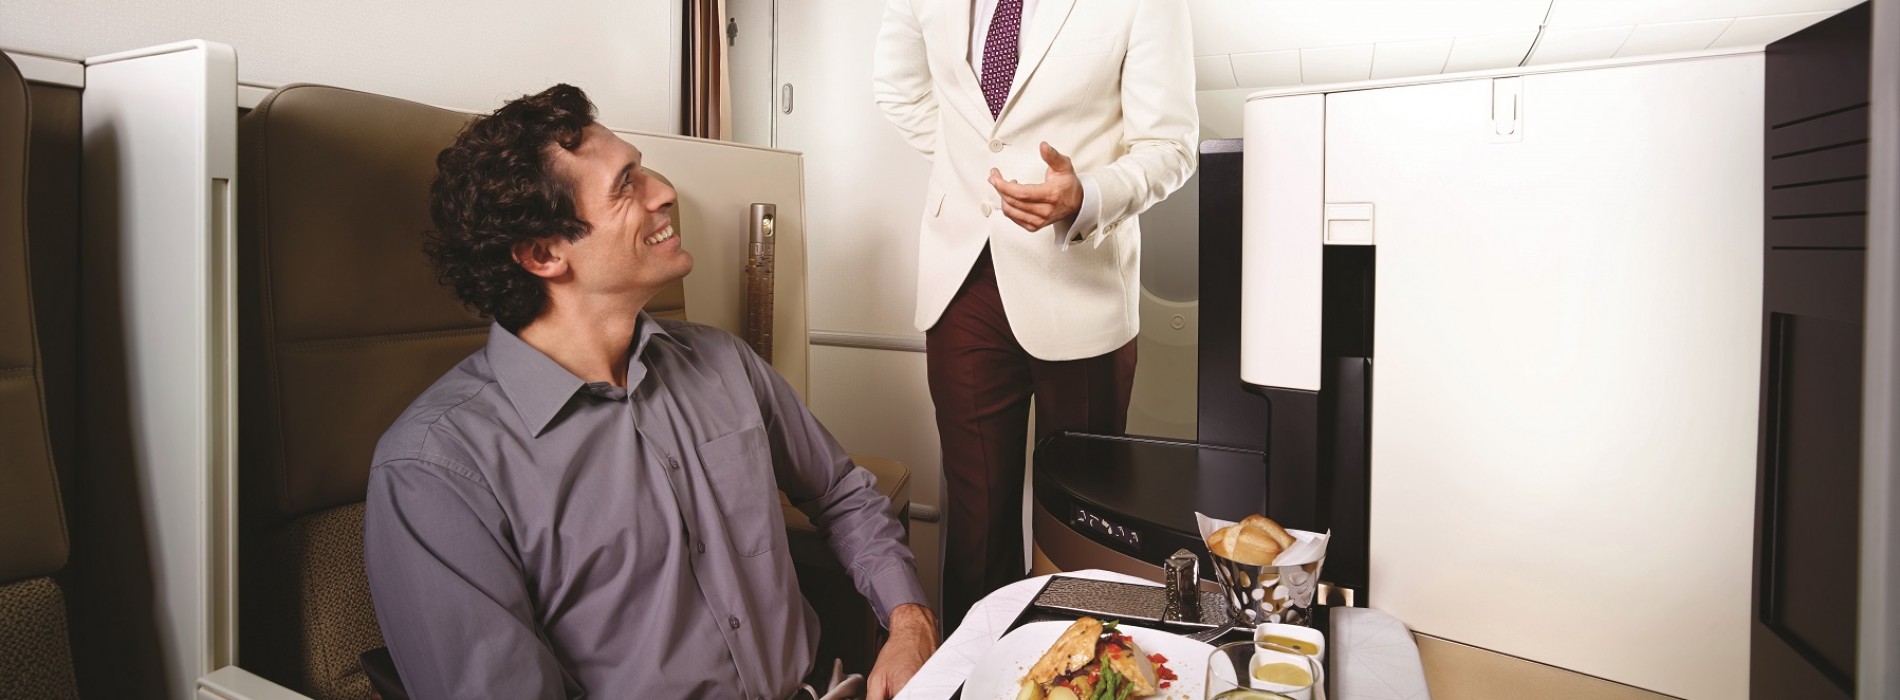 Etihad Airways announces special prices for passengers flying from India for this festive season